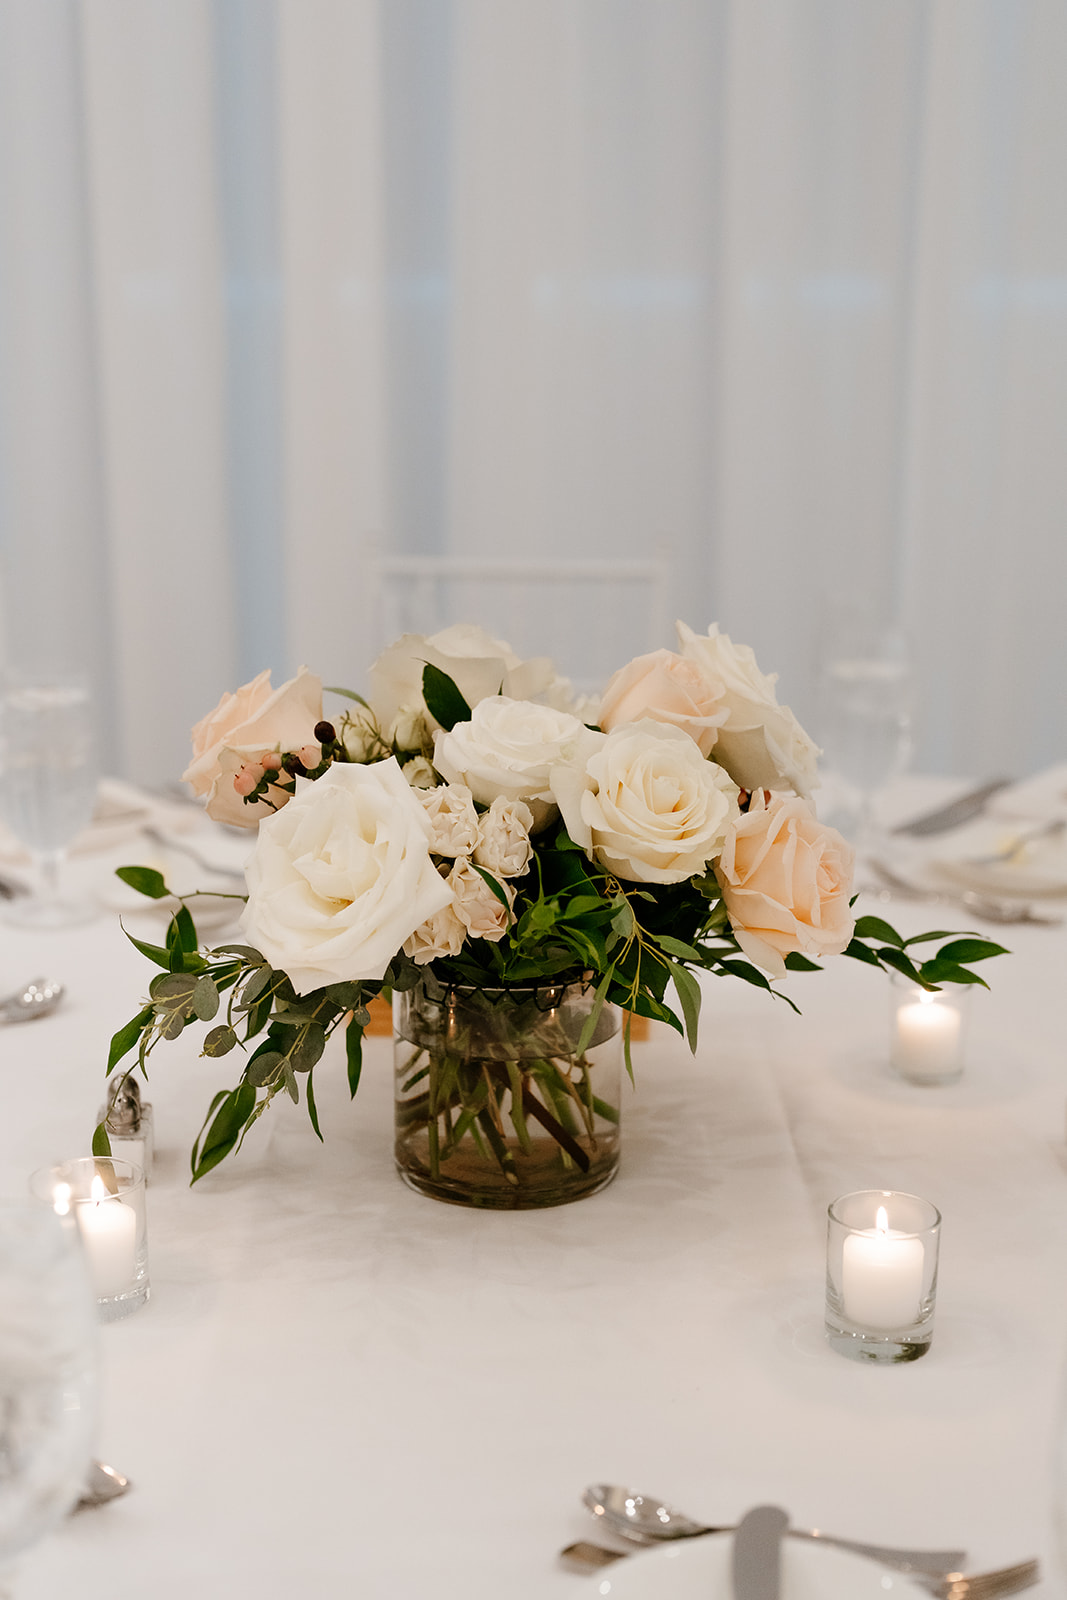 A centerpiece of white and pale pink roses with green foliage in a clear glass vase, accompanied by small lit candles, set upon a white tablecloth.